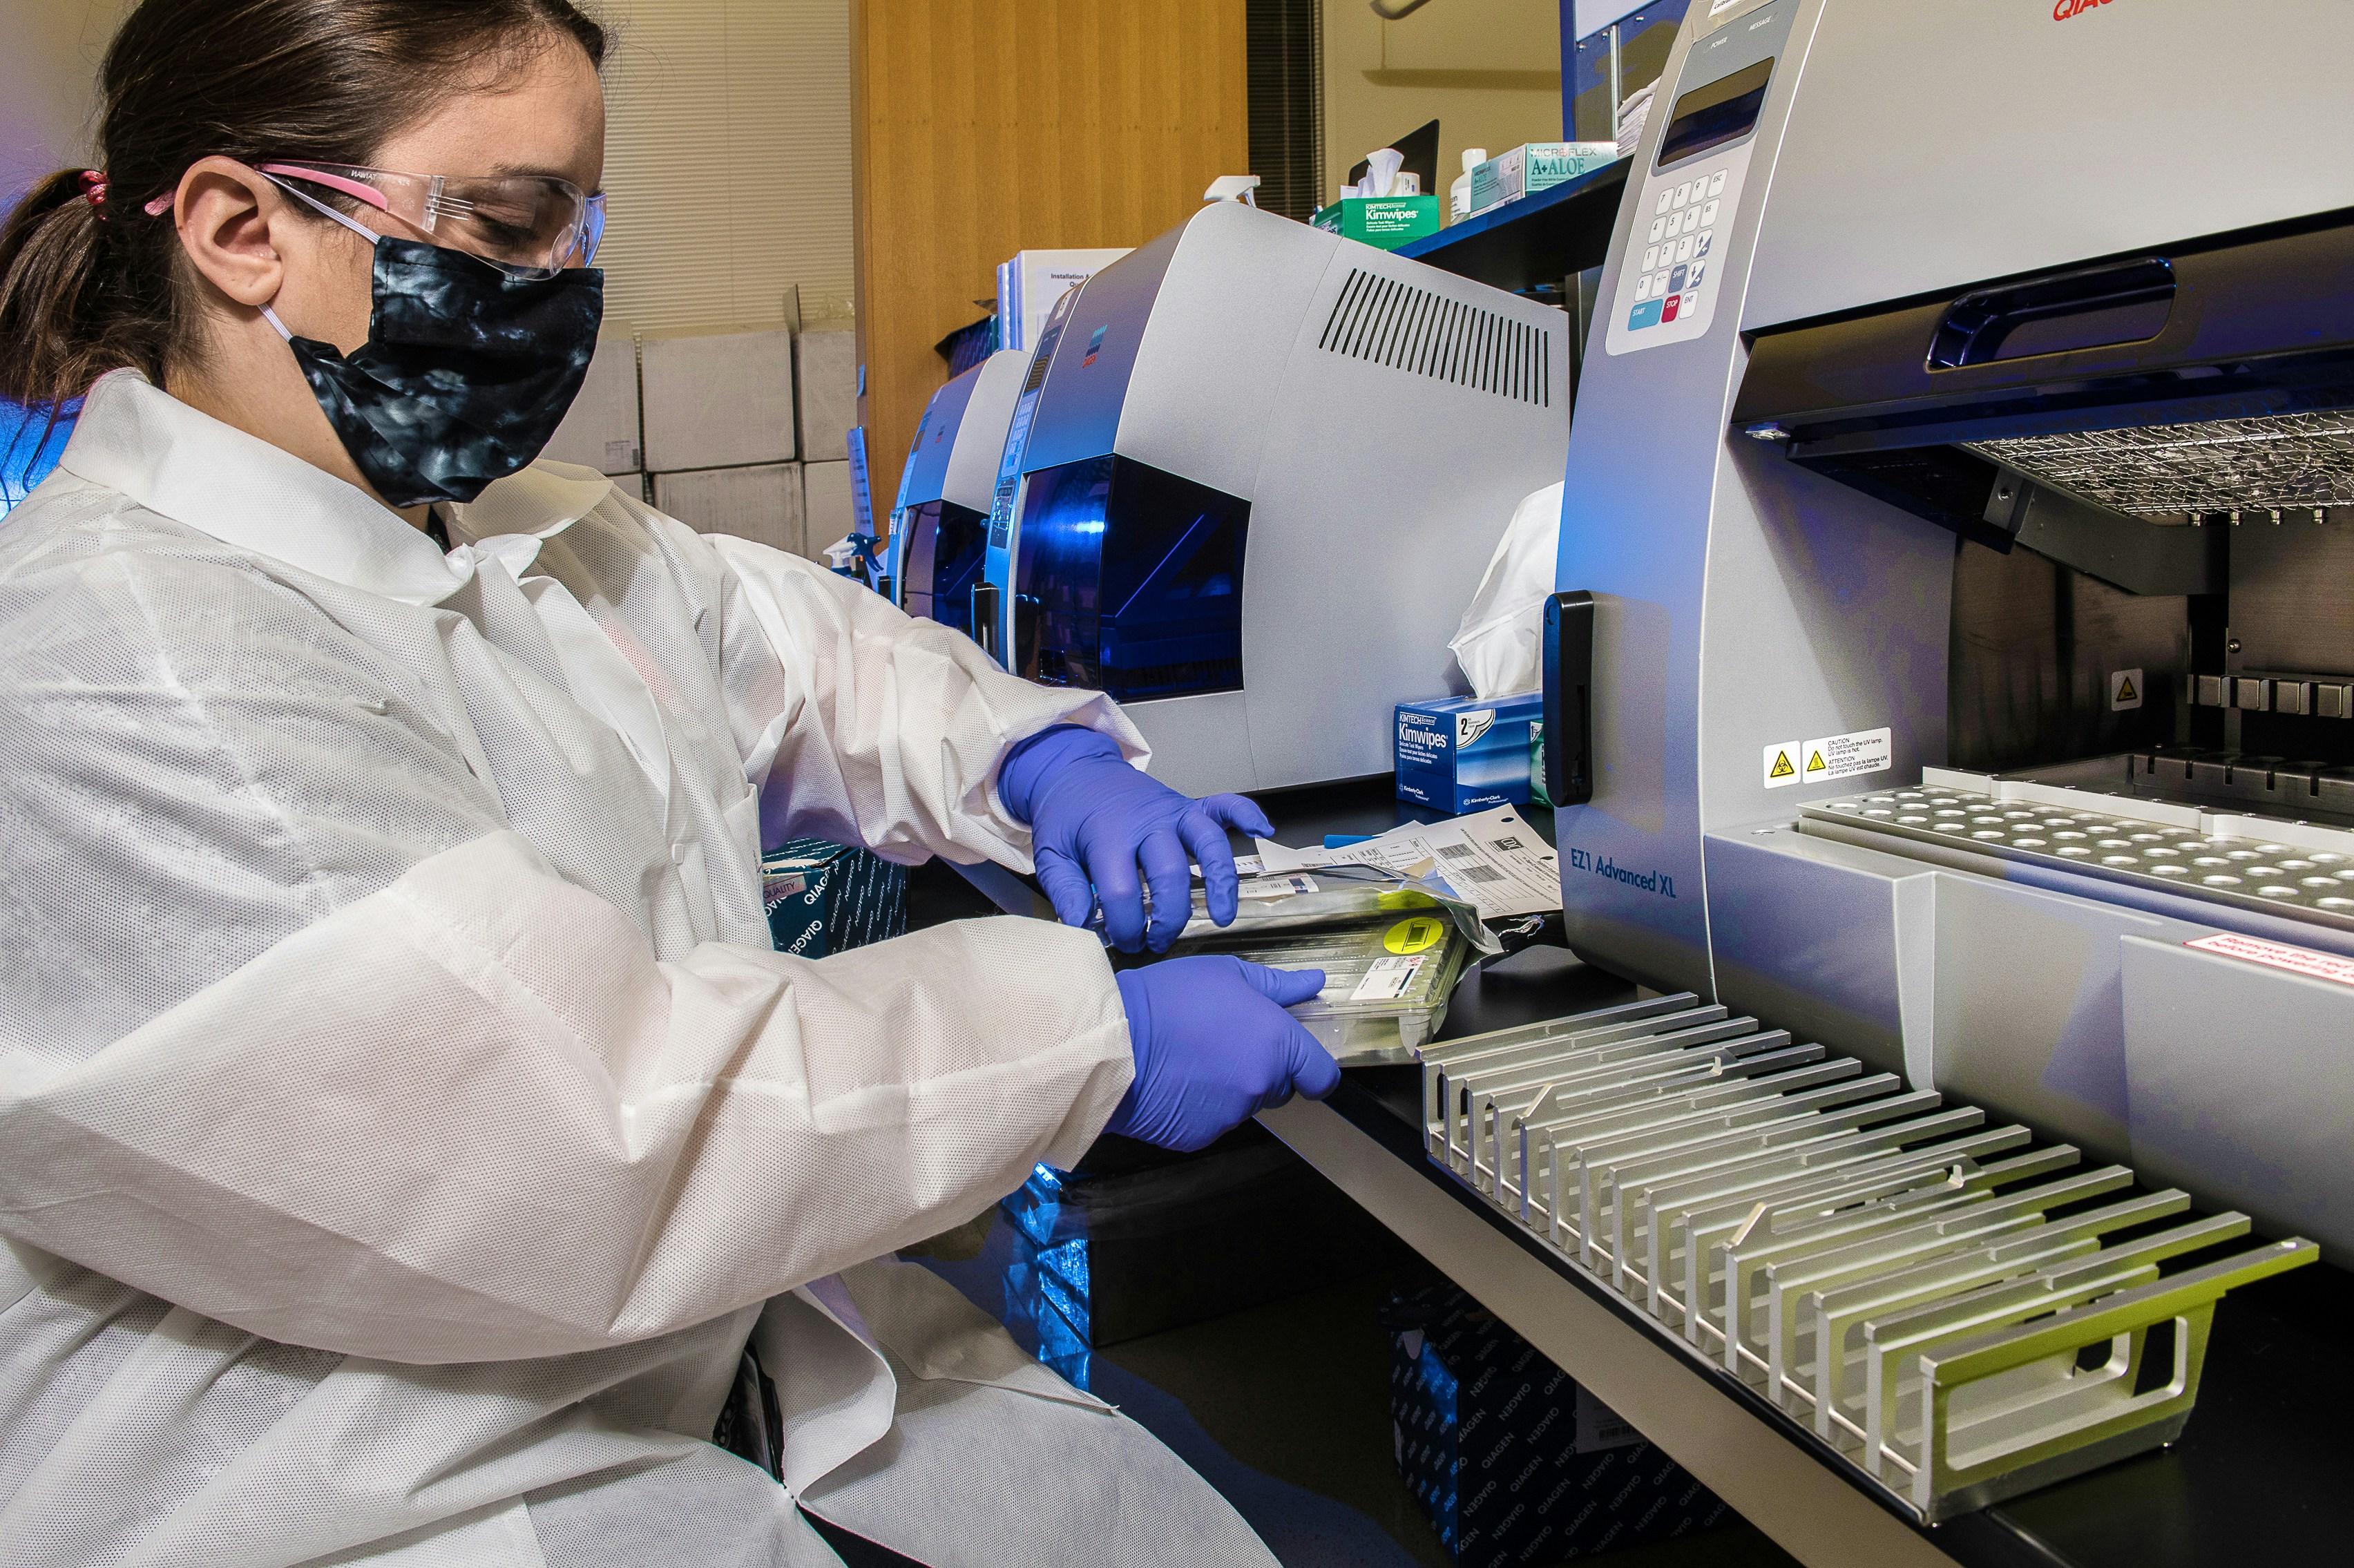 This Centers for Disease Control and Prevention (CDC) scientist was unpacking testing kits for real-time reverse transcription-polymerase chain reaction (RT-PCR) analysis of SARS-CoV-2 specimens. Millions of these test kits have been processed in the United States since February 2020, when the FDA first granted emergency use authorization for a test for SARS-CoV-2, the virus that causes COVID-19.